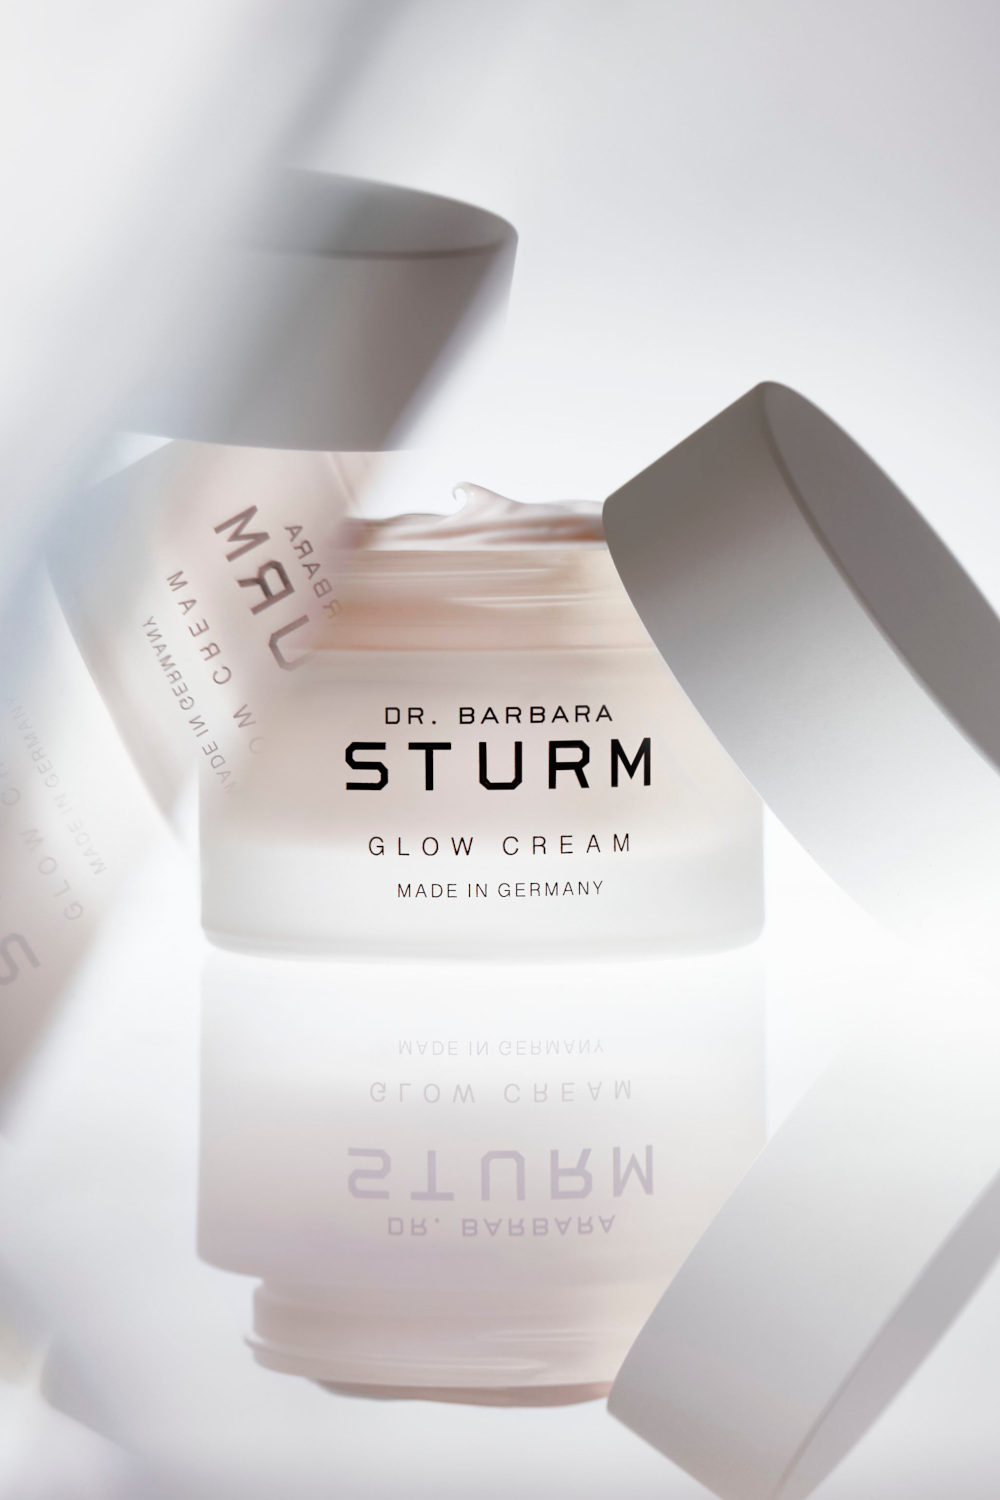 Everything You Need To Know About Dr. Barbara Sturm's New Glow Cream